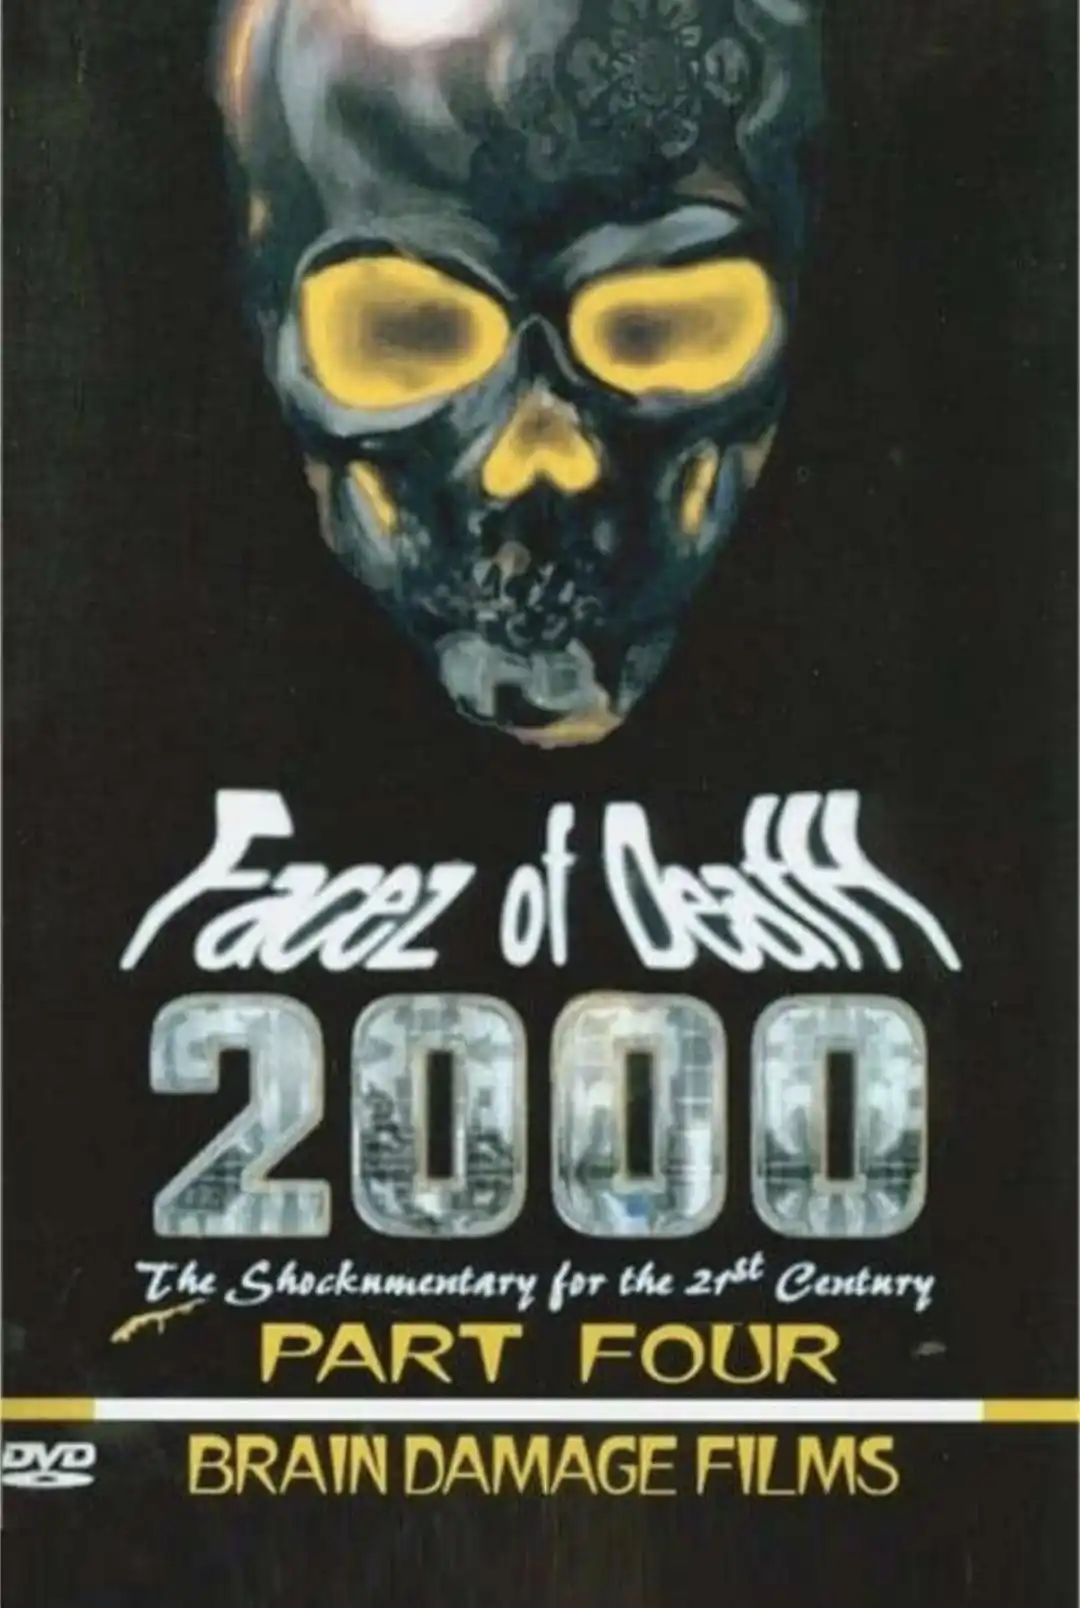 Watch and Download Facez of Death 2000 Part IV 1